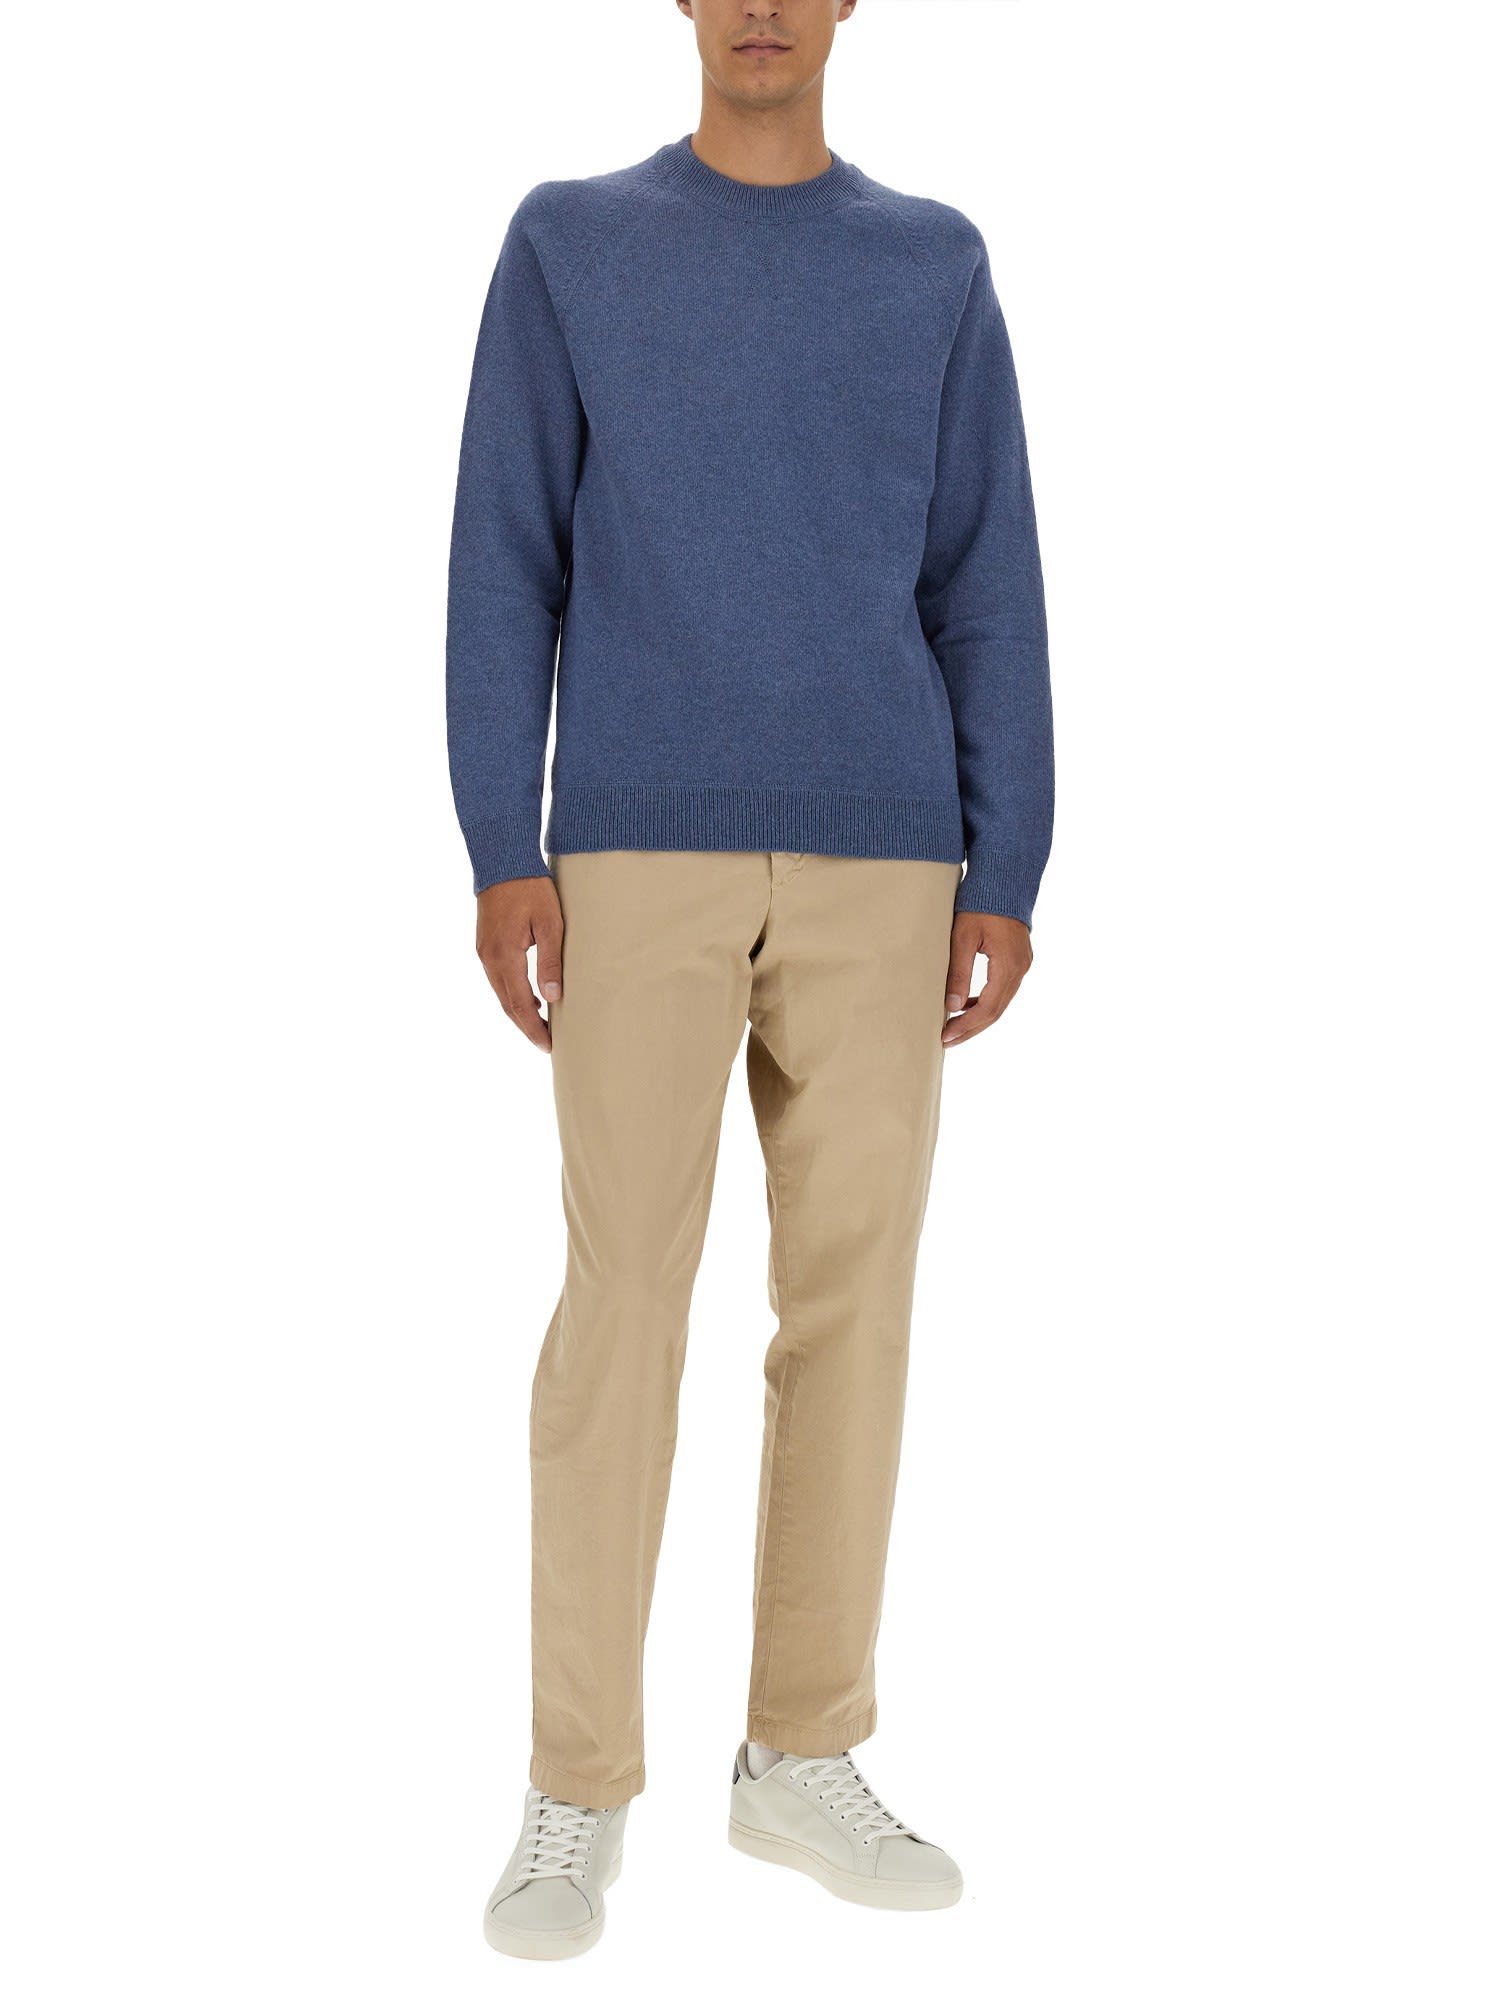 Shop Ps By Paul Smith Wool Jersey. Sweater In Greyish Blue